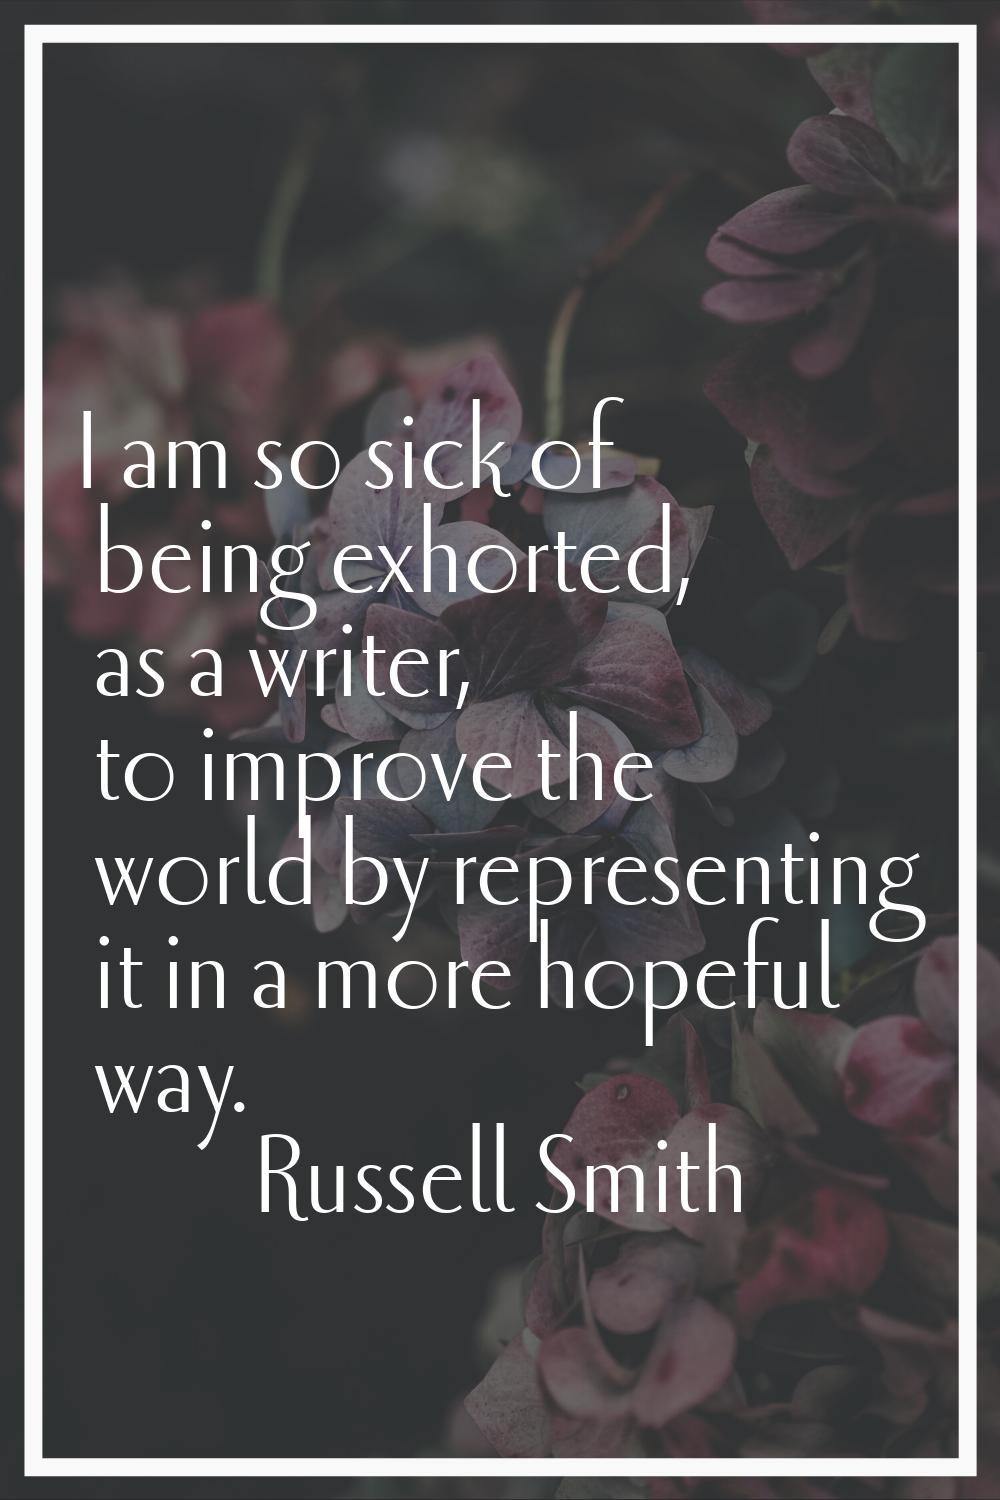 I am so sick of being exhorted, as a writer, to improve the world by representing it in a more hope